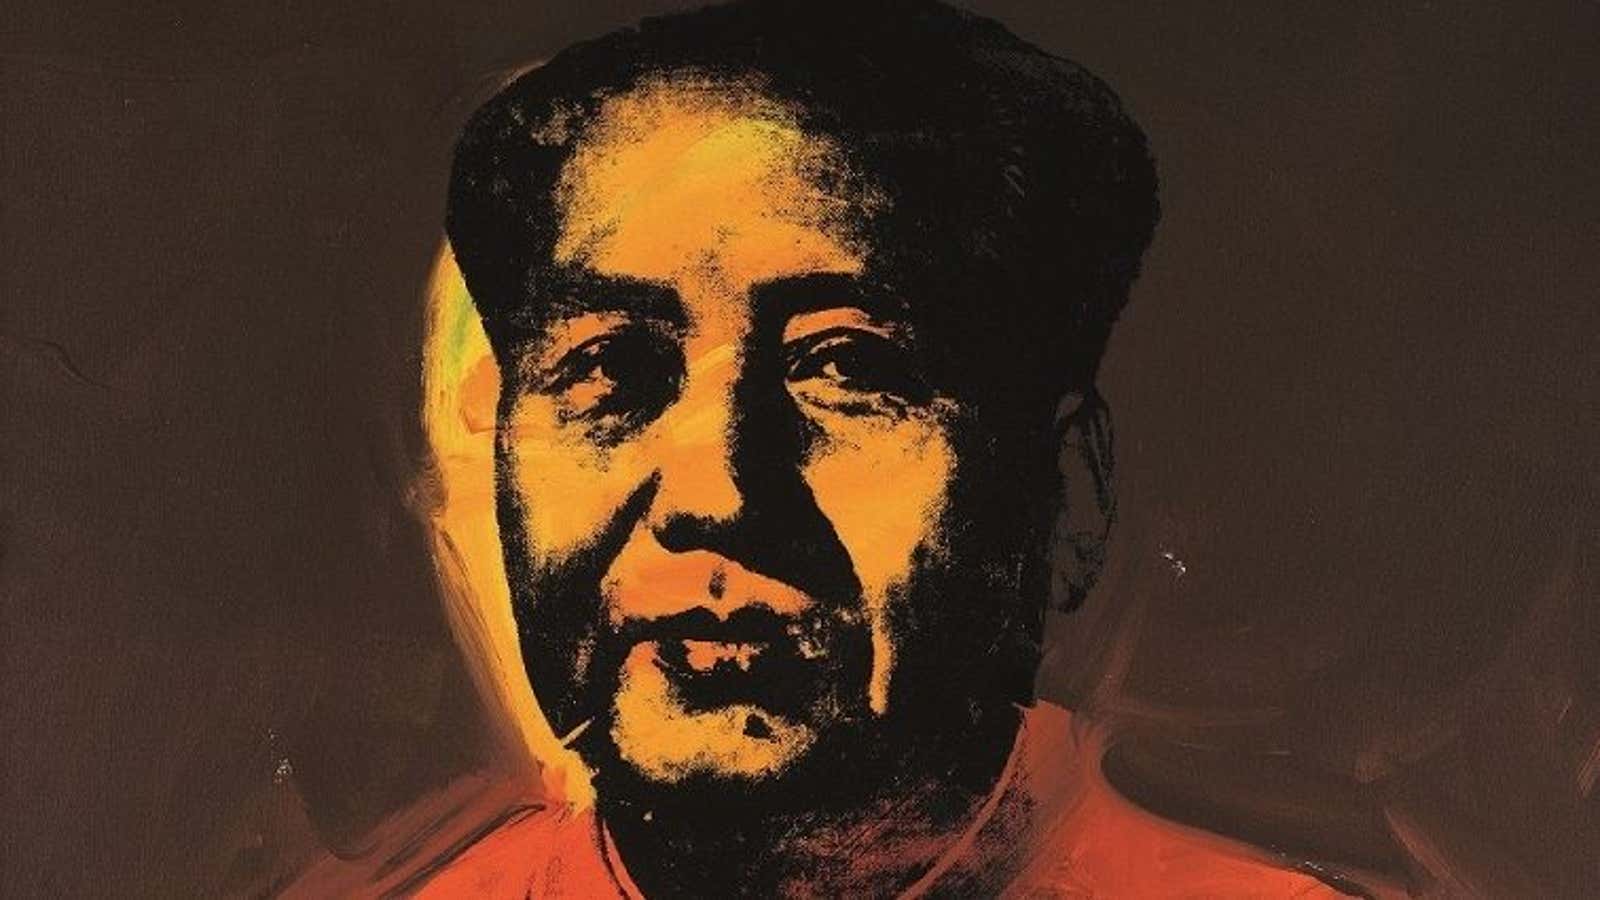 Andy Warhol’s portrait of Mao Zedong recently sold for $12.6 million.